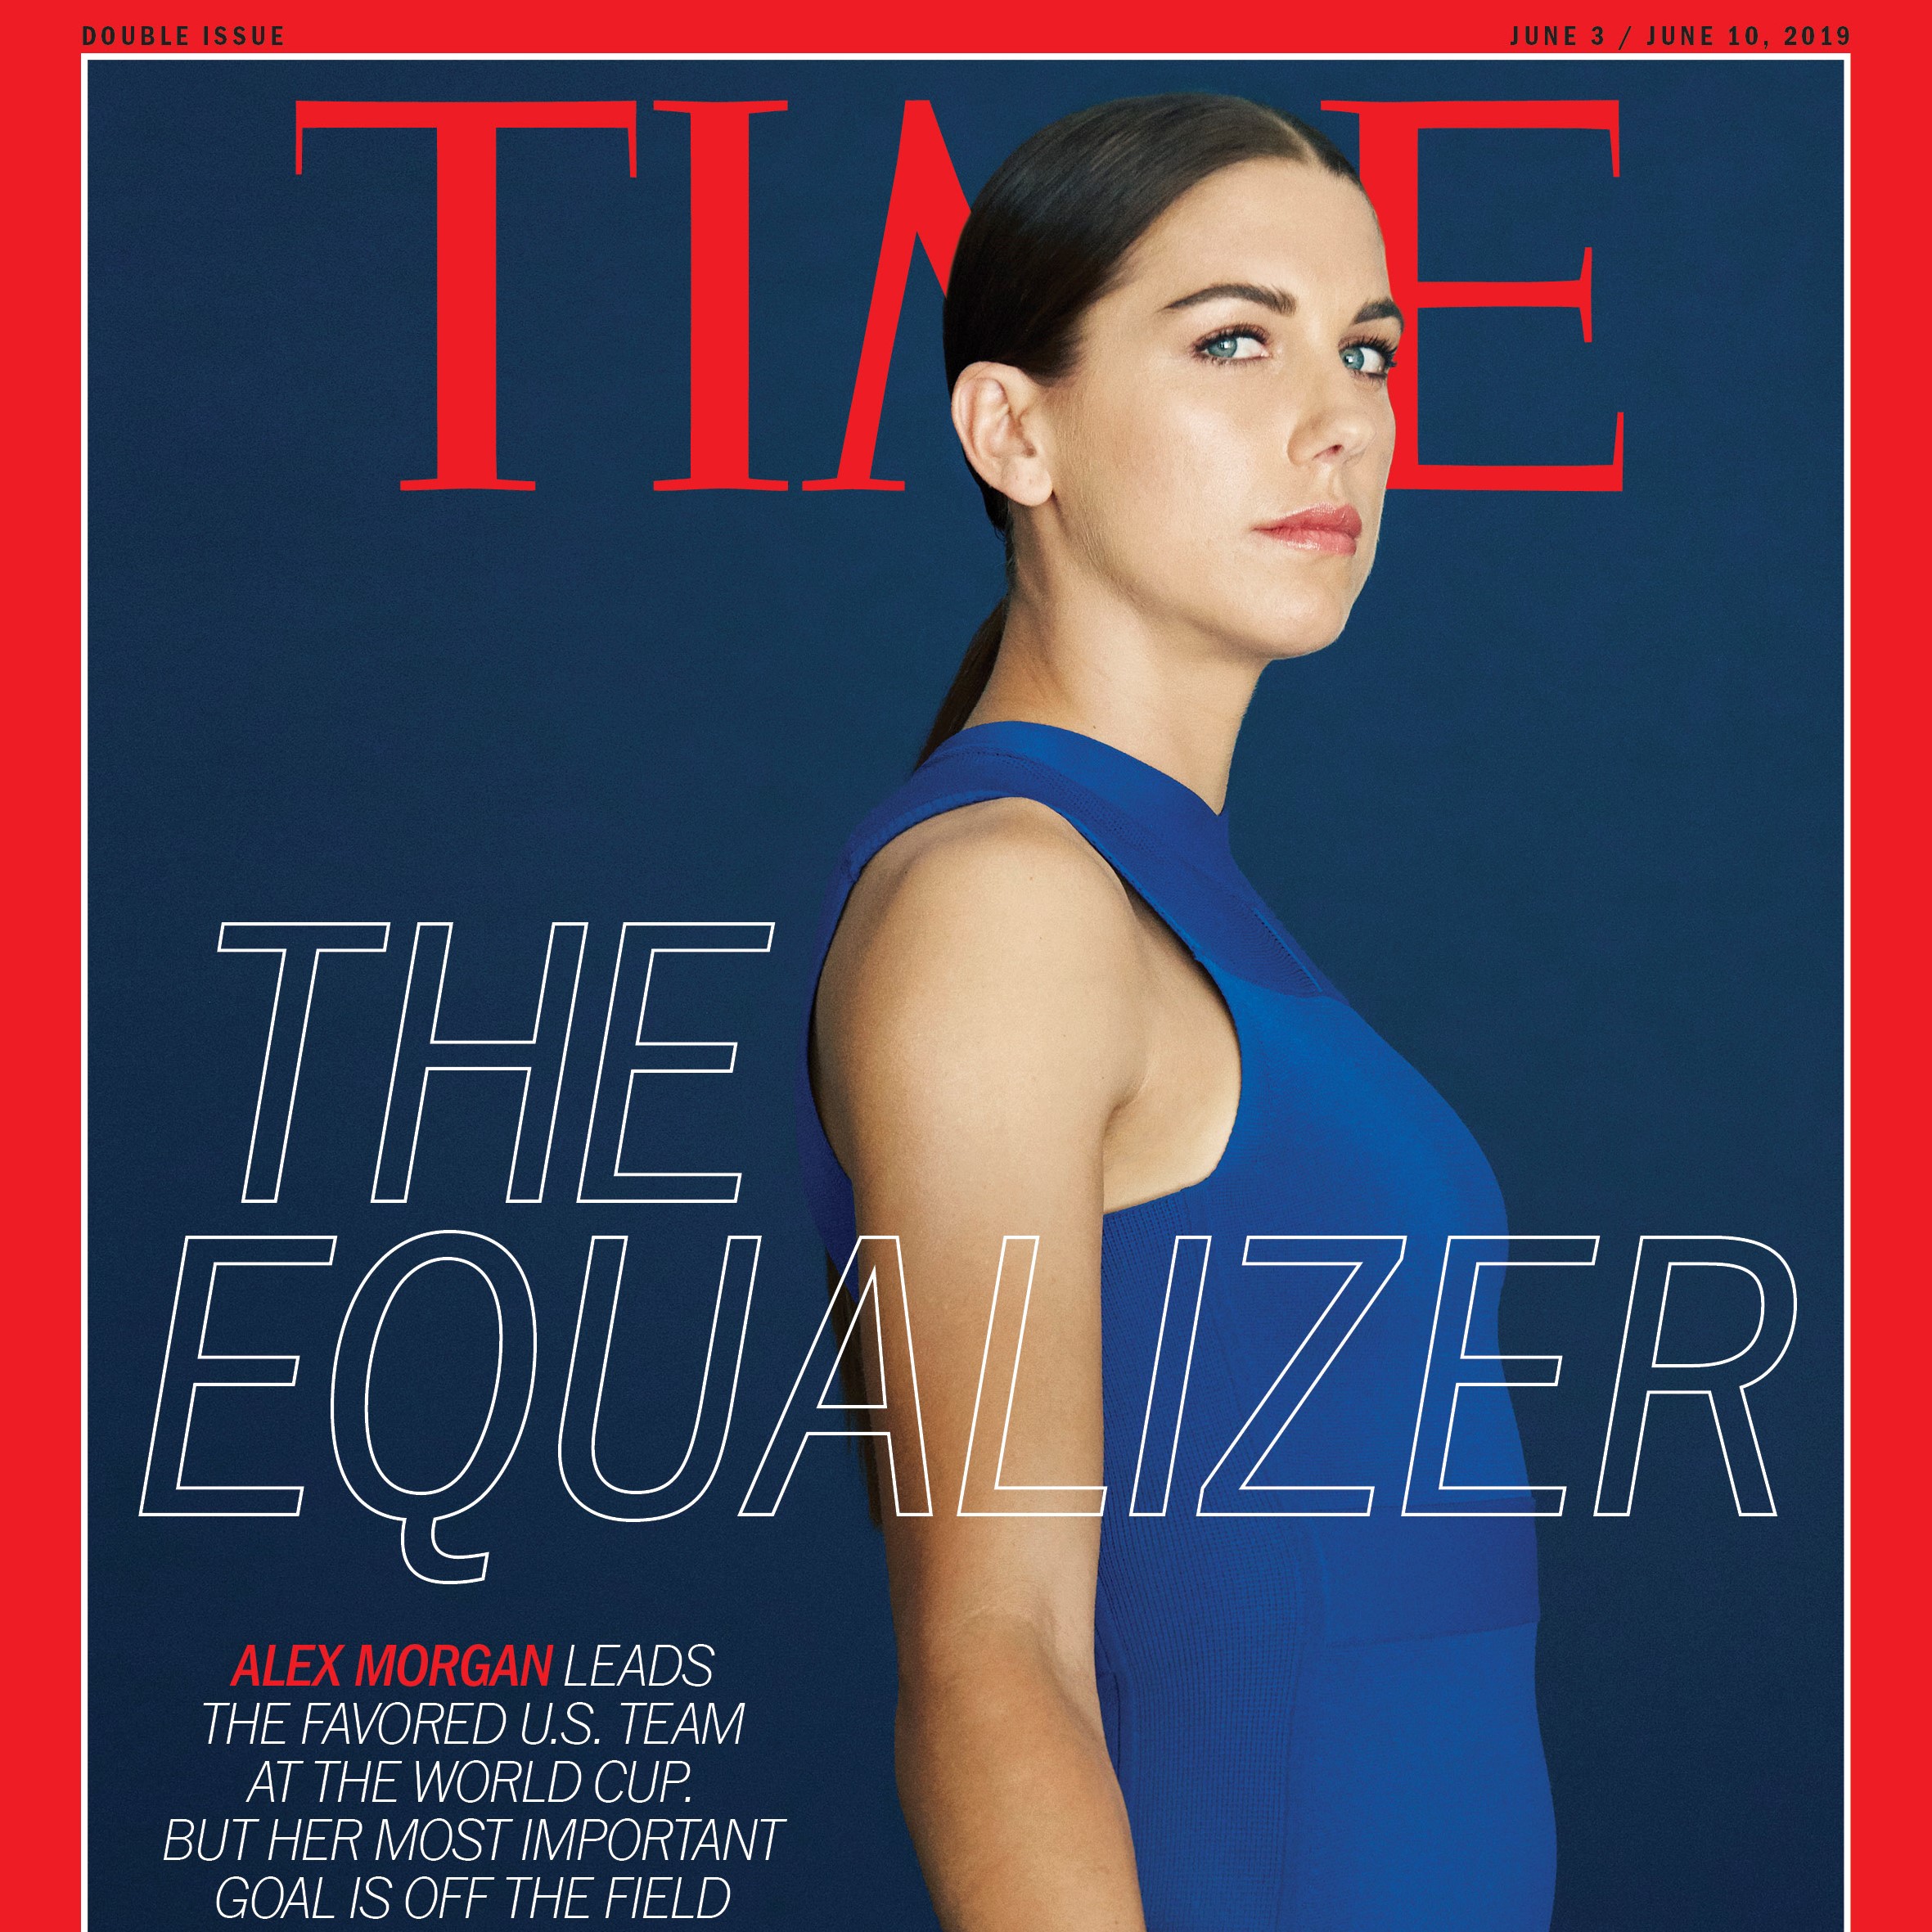 The US women's soccer team headed to the 2019 Women's Soccer World Cup: Time magazine cover